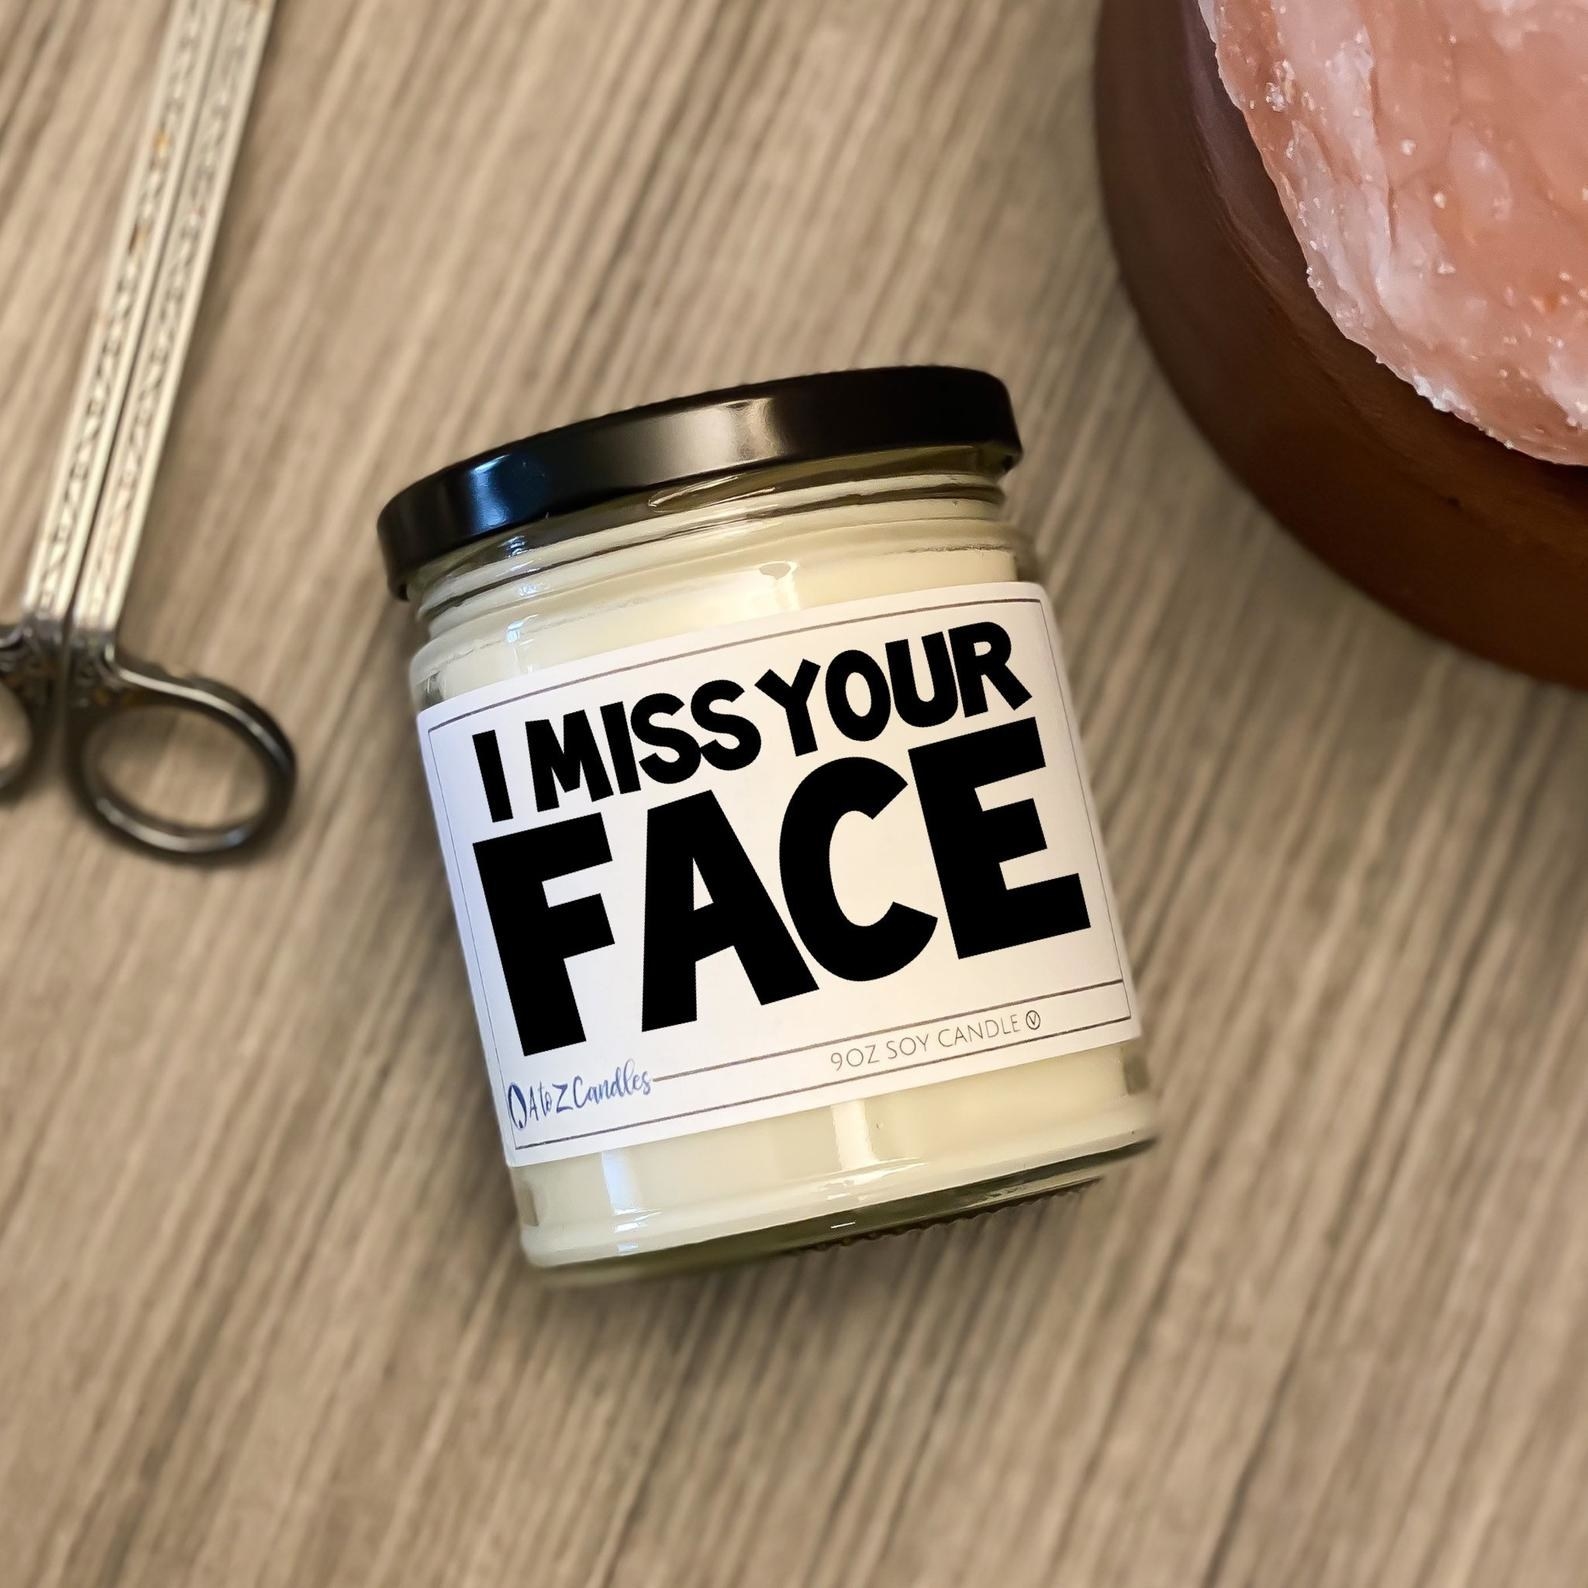 A candle that&#x27;s labeled &quot;I miss your face&quot;